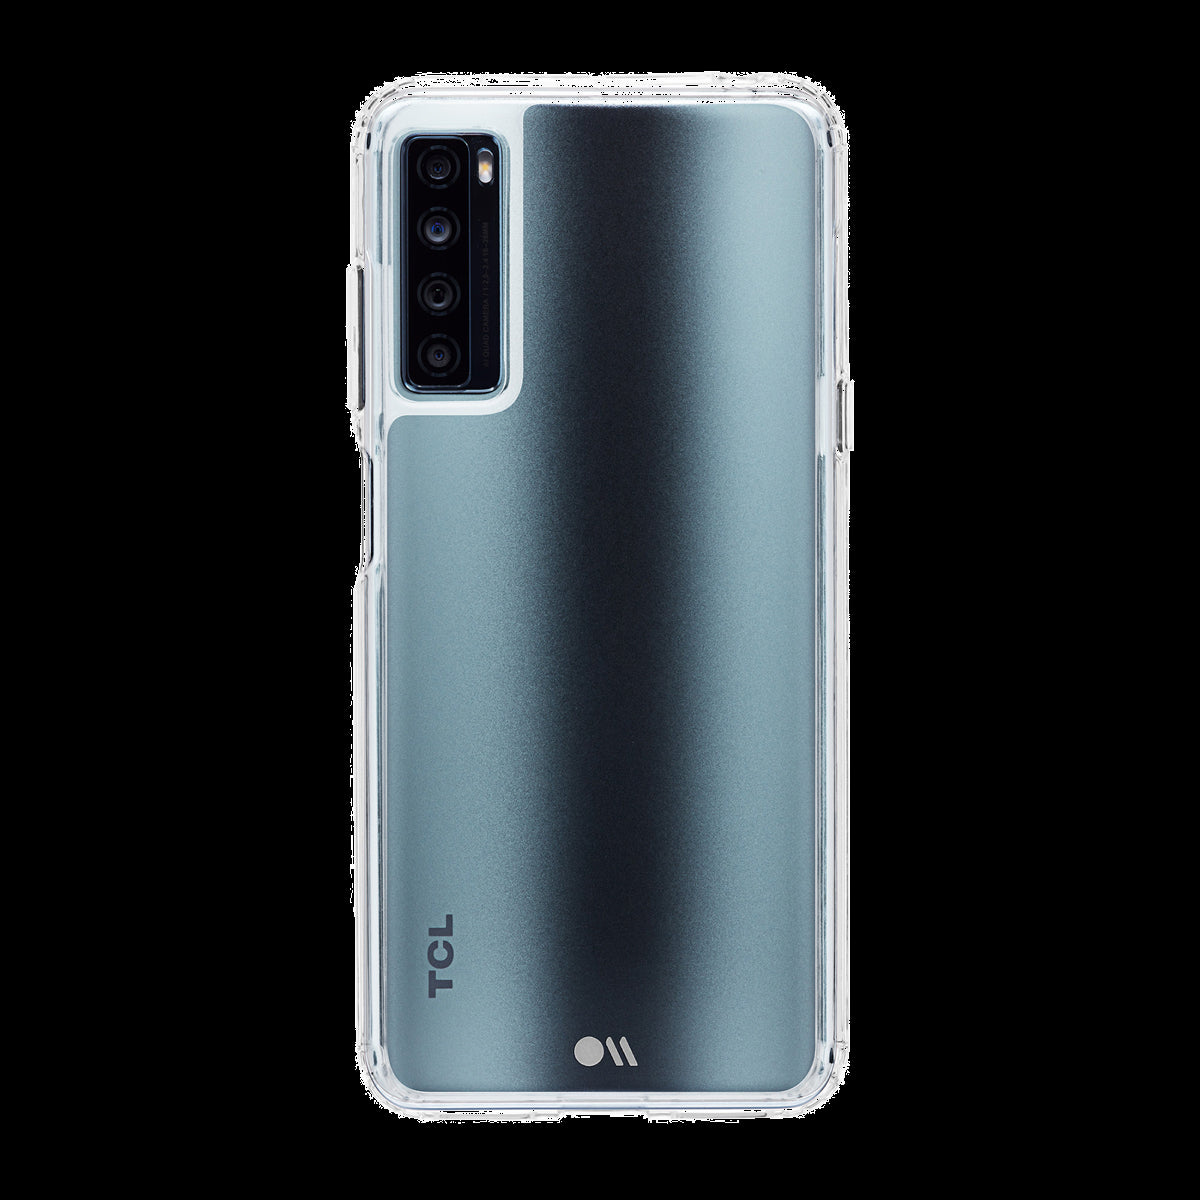 <p>Clear, sleek and protective. The Case-Mate Tough Clear features 10-foot drop protection and a one-piece minimalistic design that will fit every occasion.</p>